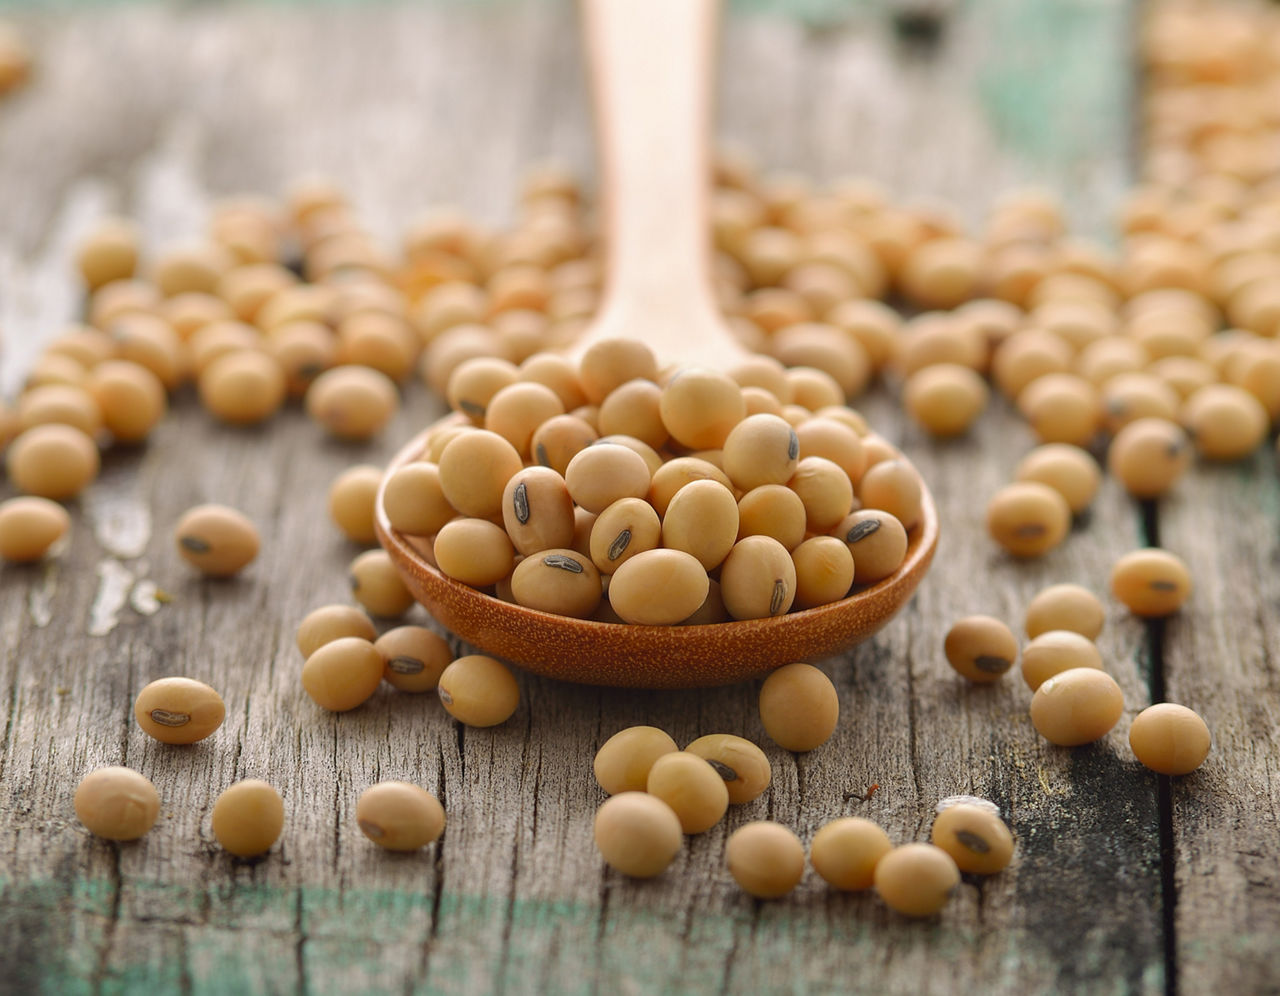 Uncooked soybeans